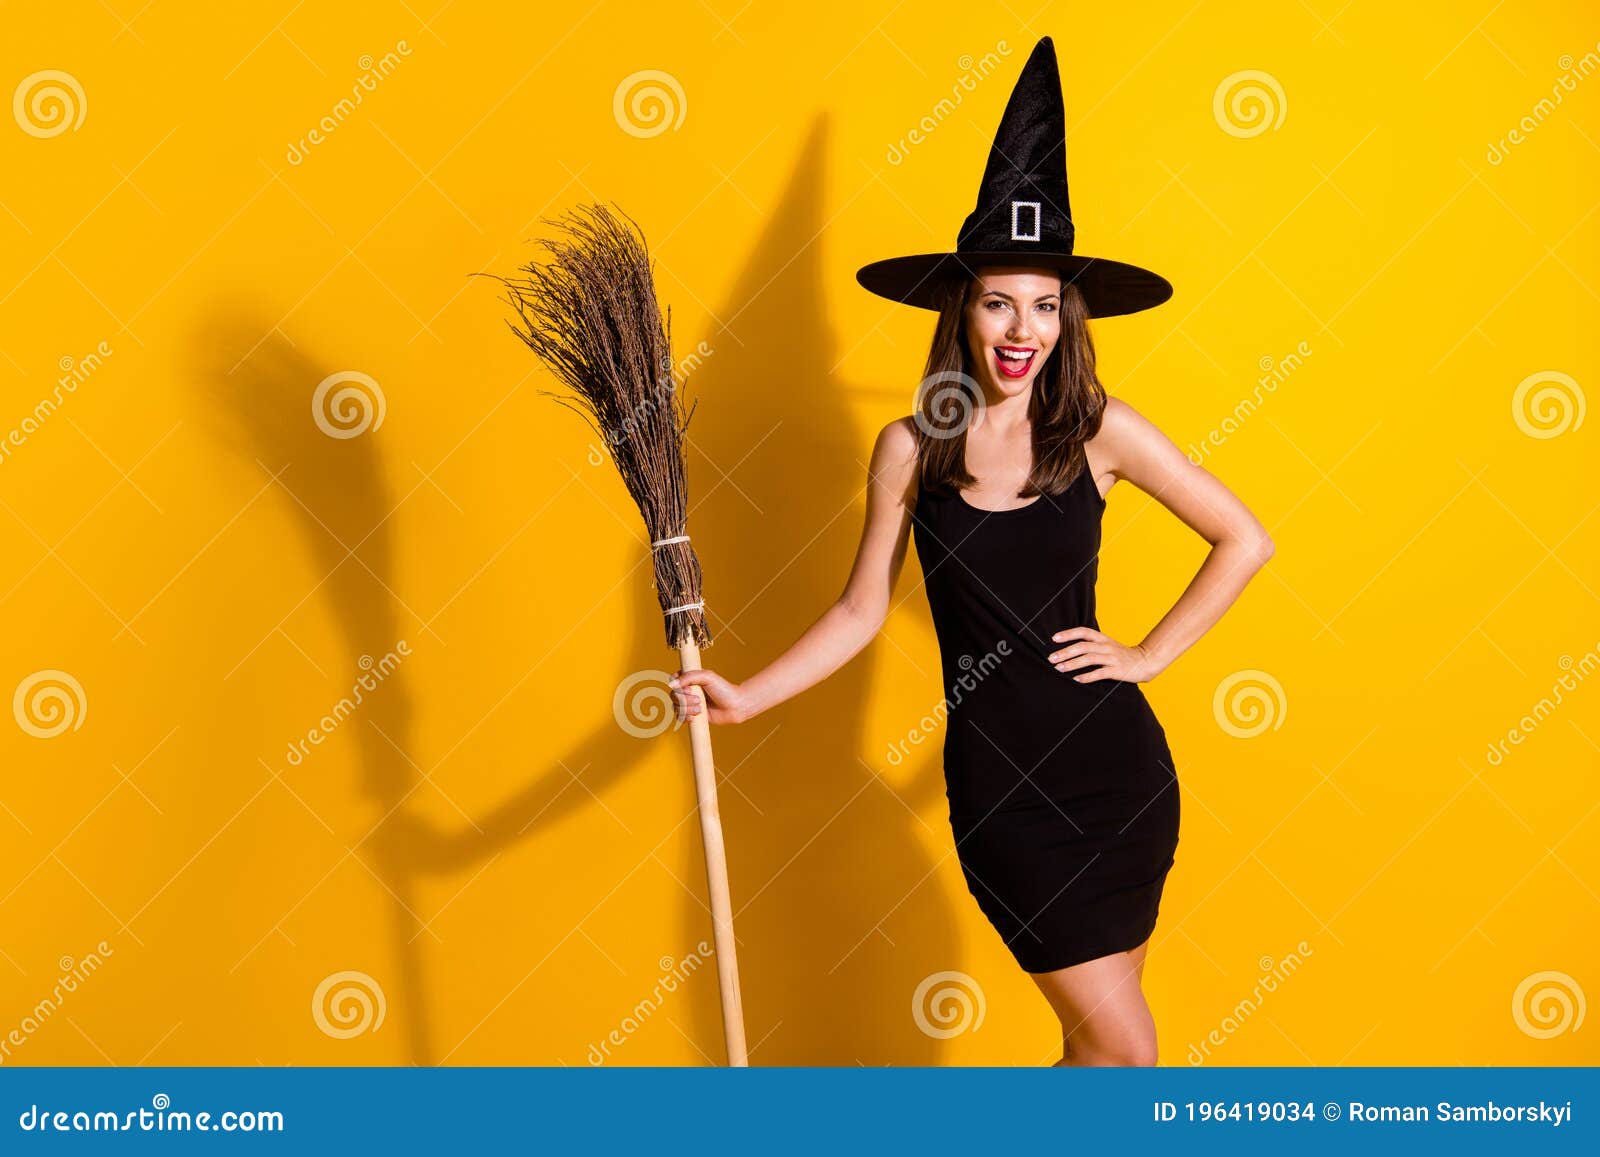 Portrait of her she nice-looking attractive pretty slender cheerful cheery lady wizard holding in hand broom magic. Portrait of her she nice-looking attractive pretty slender cheerful cheery lady, wizard holding in hand broom magic season event isolated bright vivid shine vibrant yellow color background